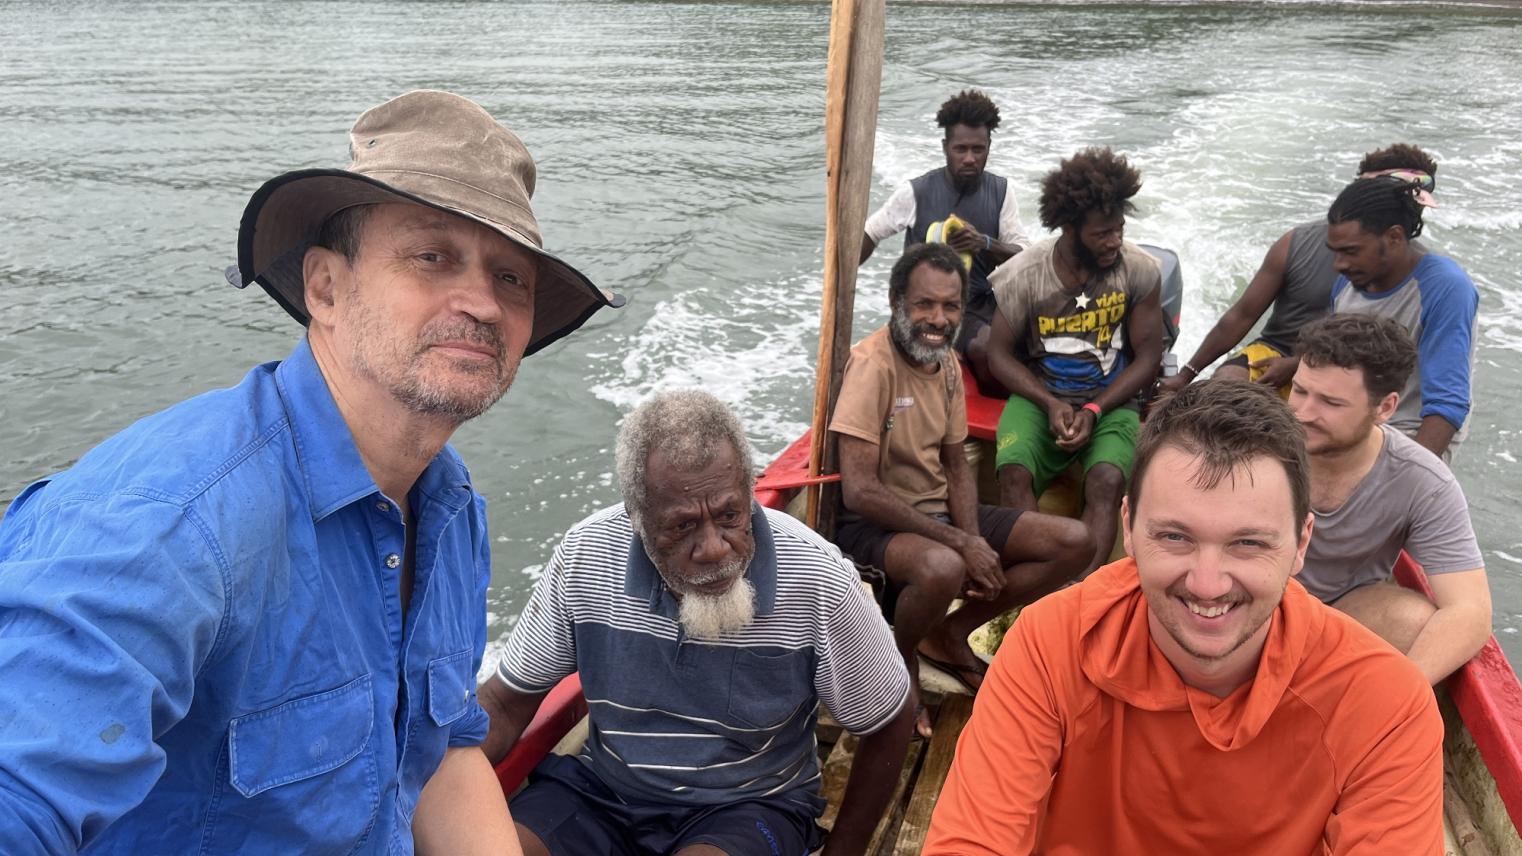 Happy to secure some transport from central to southern Epi. L to R. Stuart Bedford, Salkon Yona, Siri Seoule with smile, Sonke Stern and Robert Henderson along with a crew of four at the rear